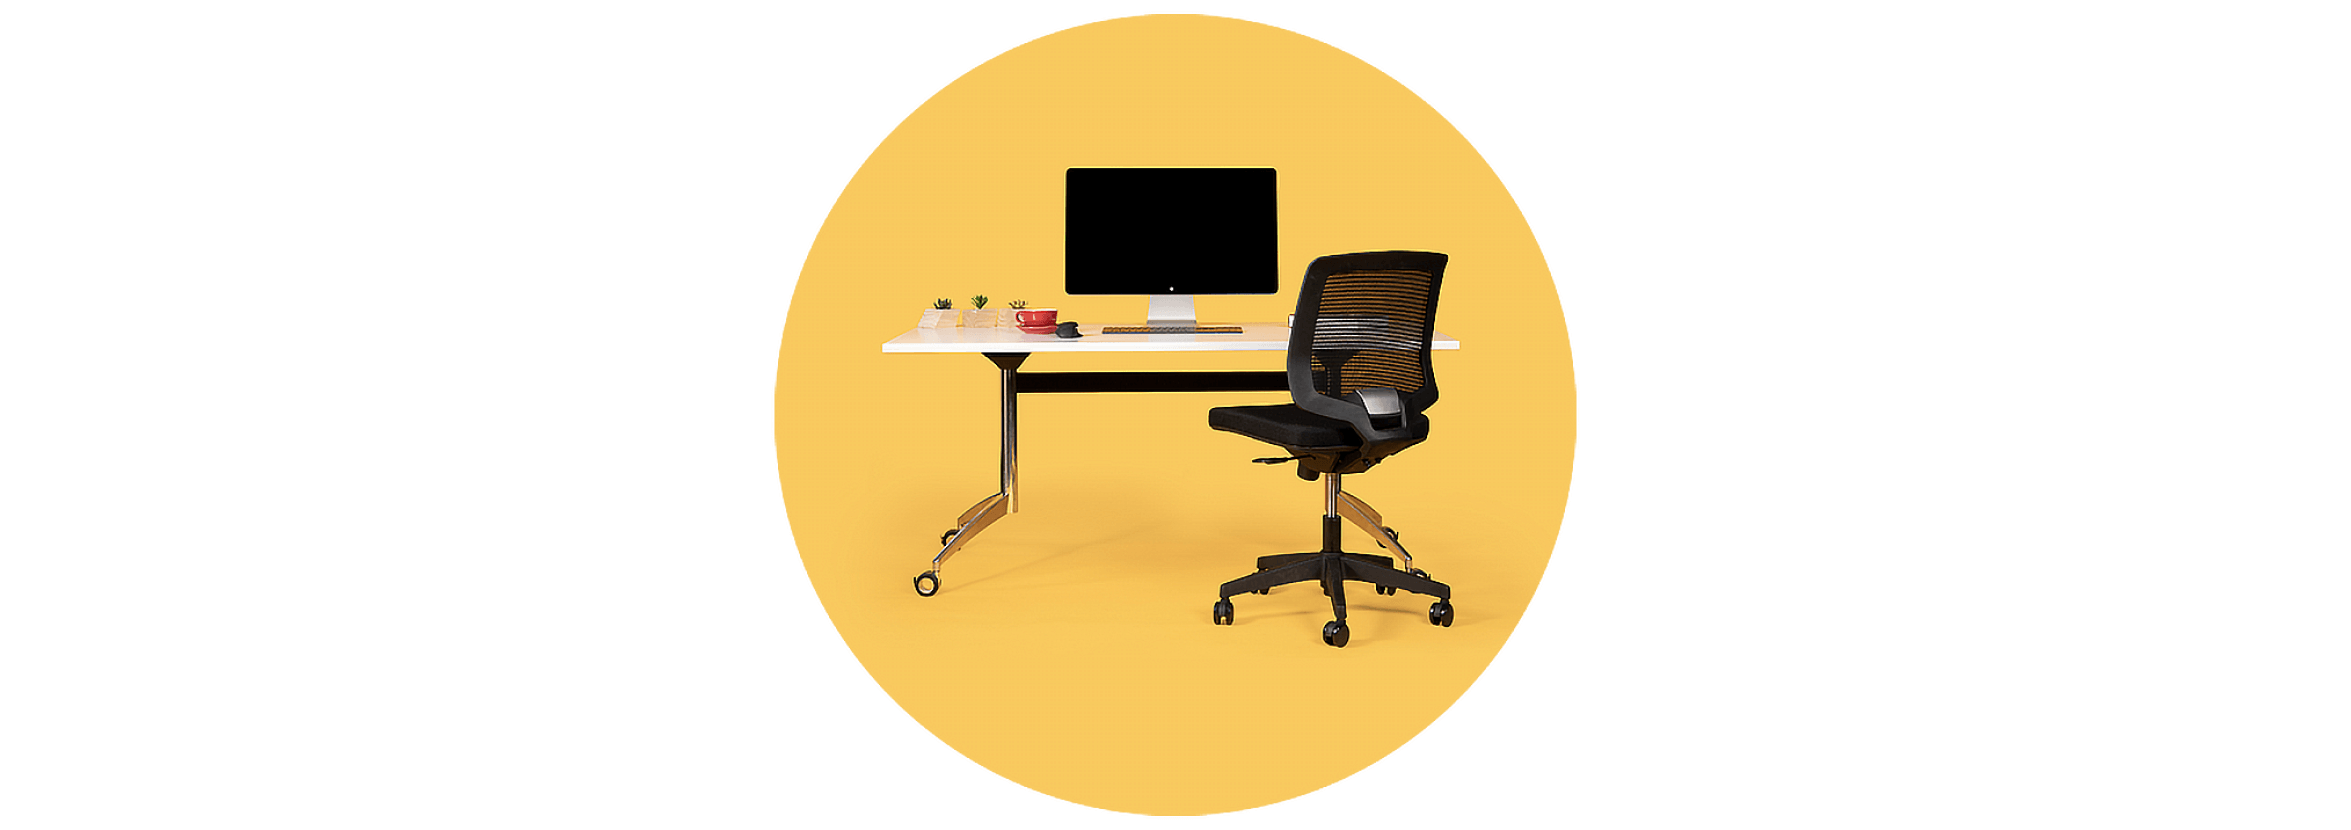 A sit-stand desk and ergonomic chair used as a hot desk in the Rewired space.